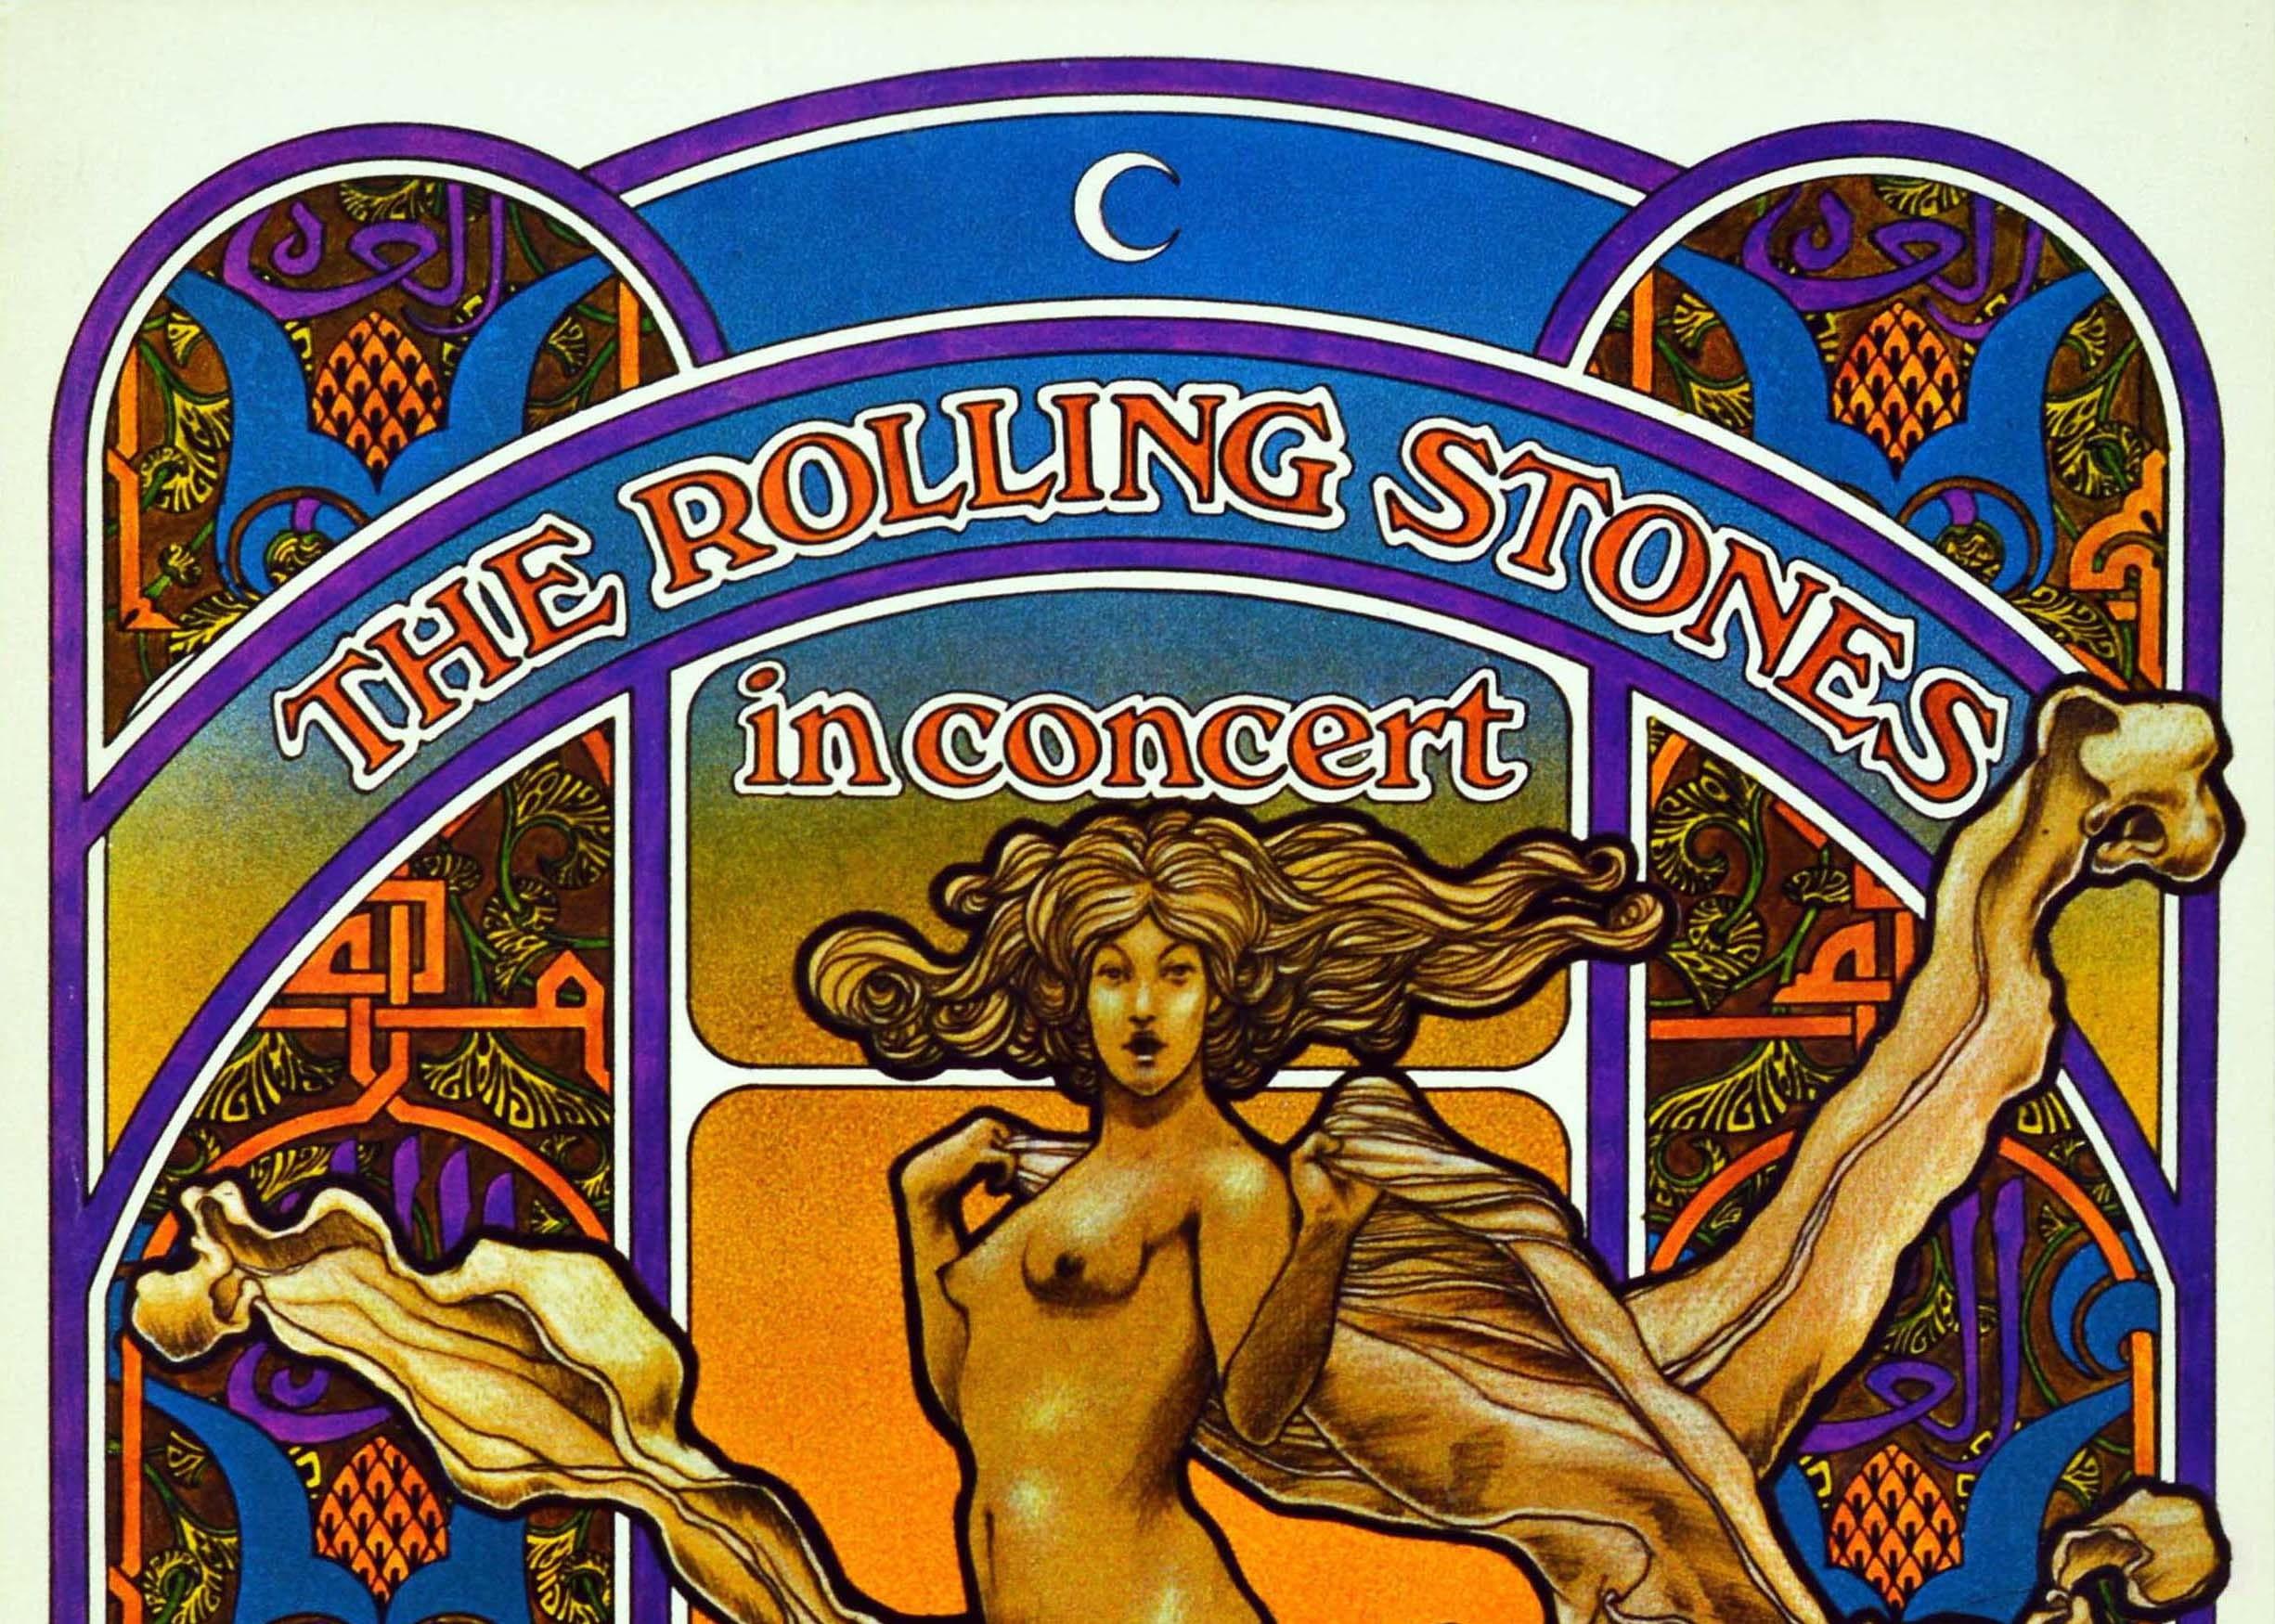 Original vintage music poster for The Rolling Stones in Concert world tour 1969-1970 featuring a vibrant colourful image by the notable American graphic designer David Edward Byrd (b 1941) of an Art Nouveau style figure with flowing hair in the